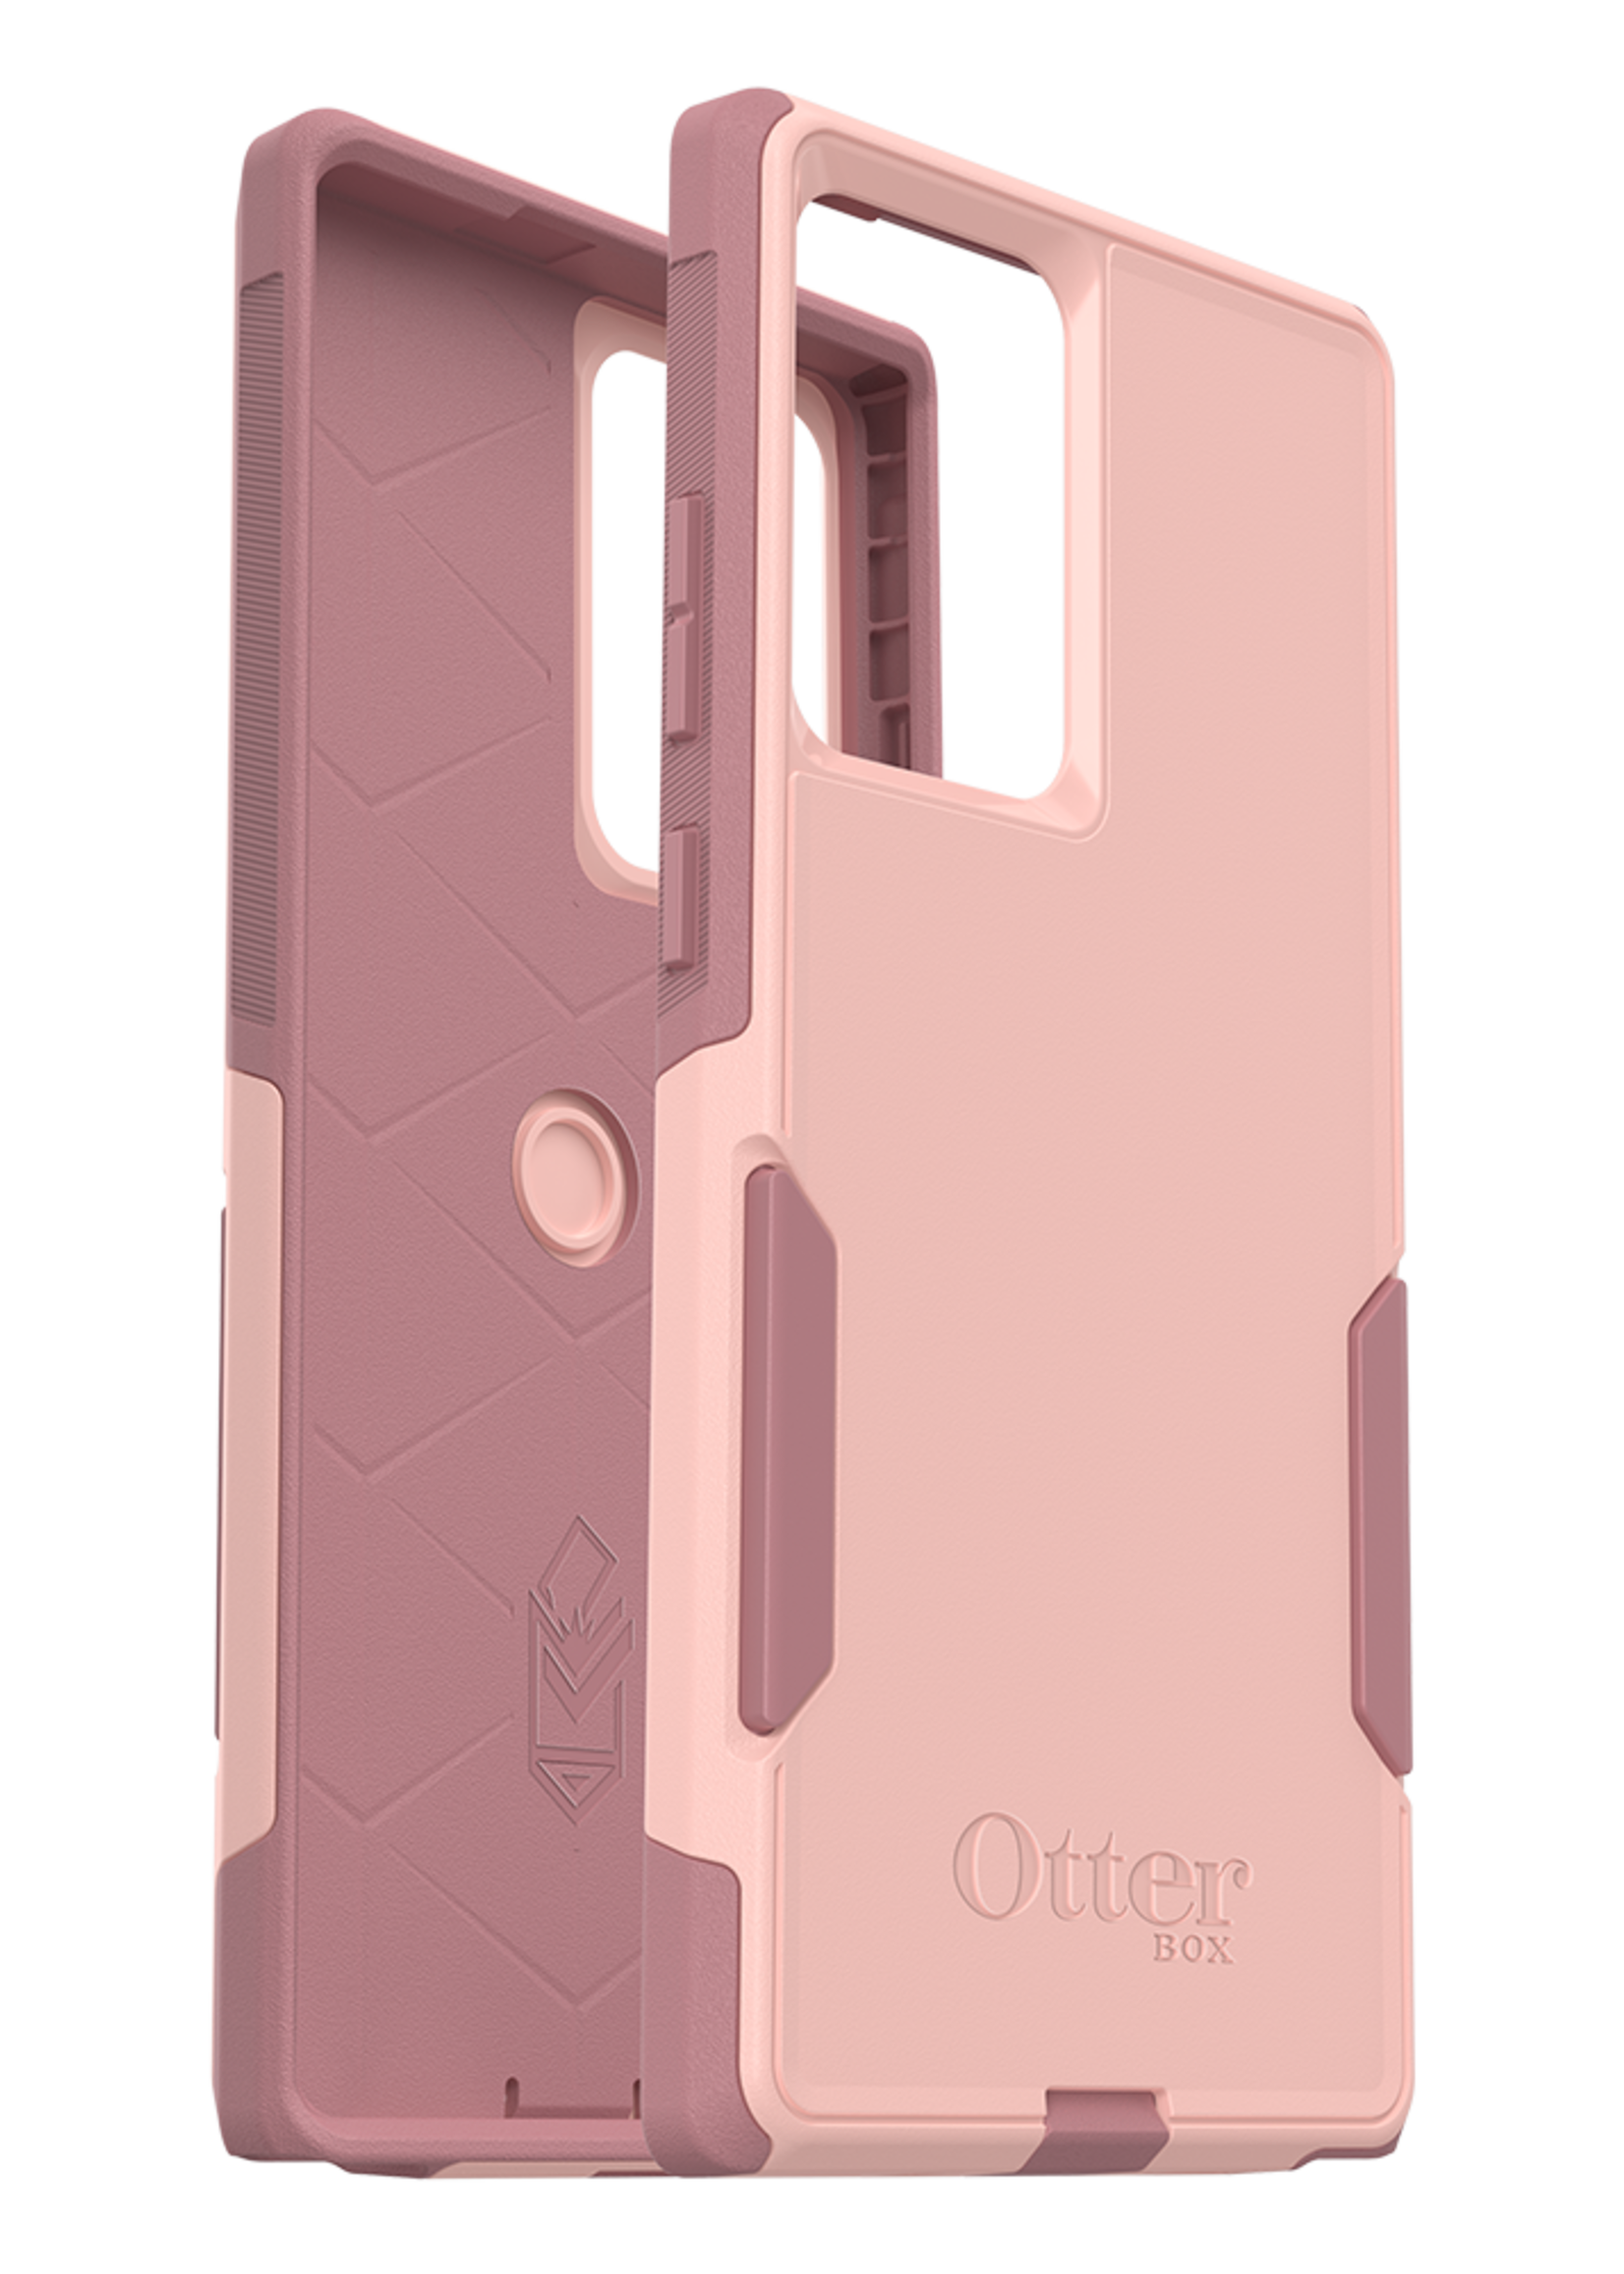 Otterbox OtterBox - Commuter Case for Samsung Galaxy Note20 Ultra 5G - Ballet Way